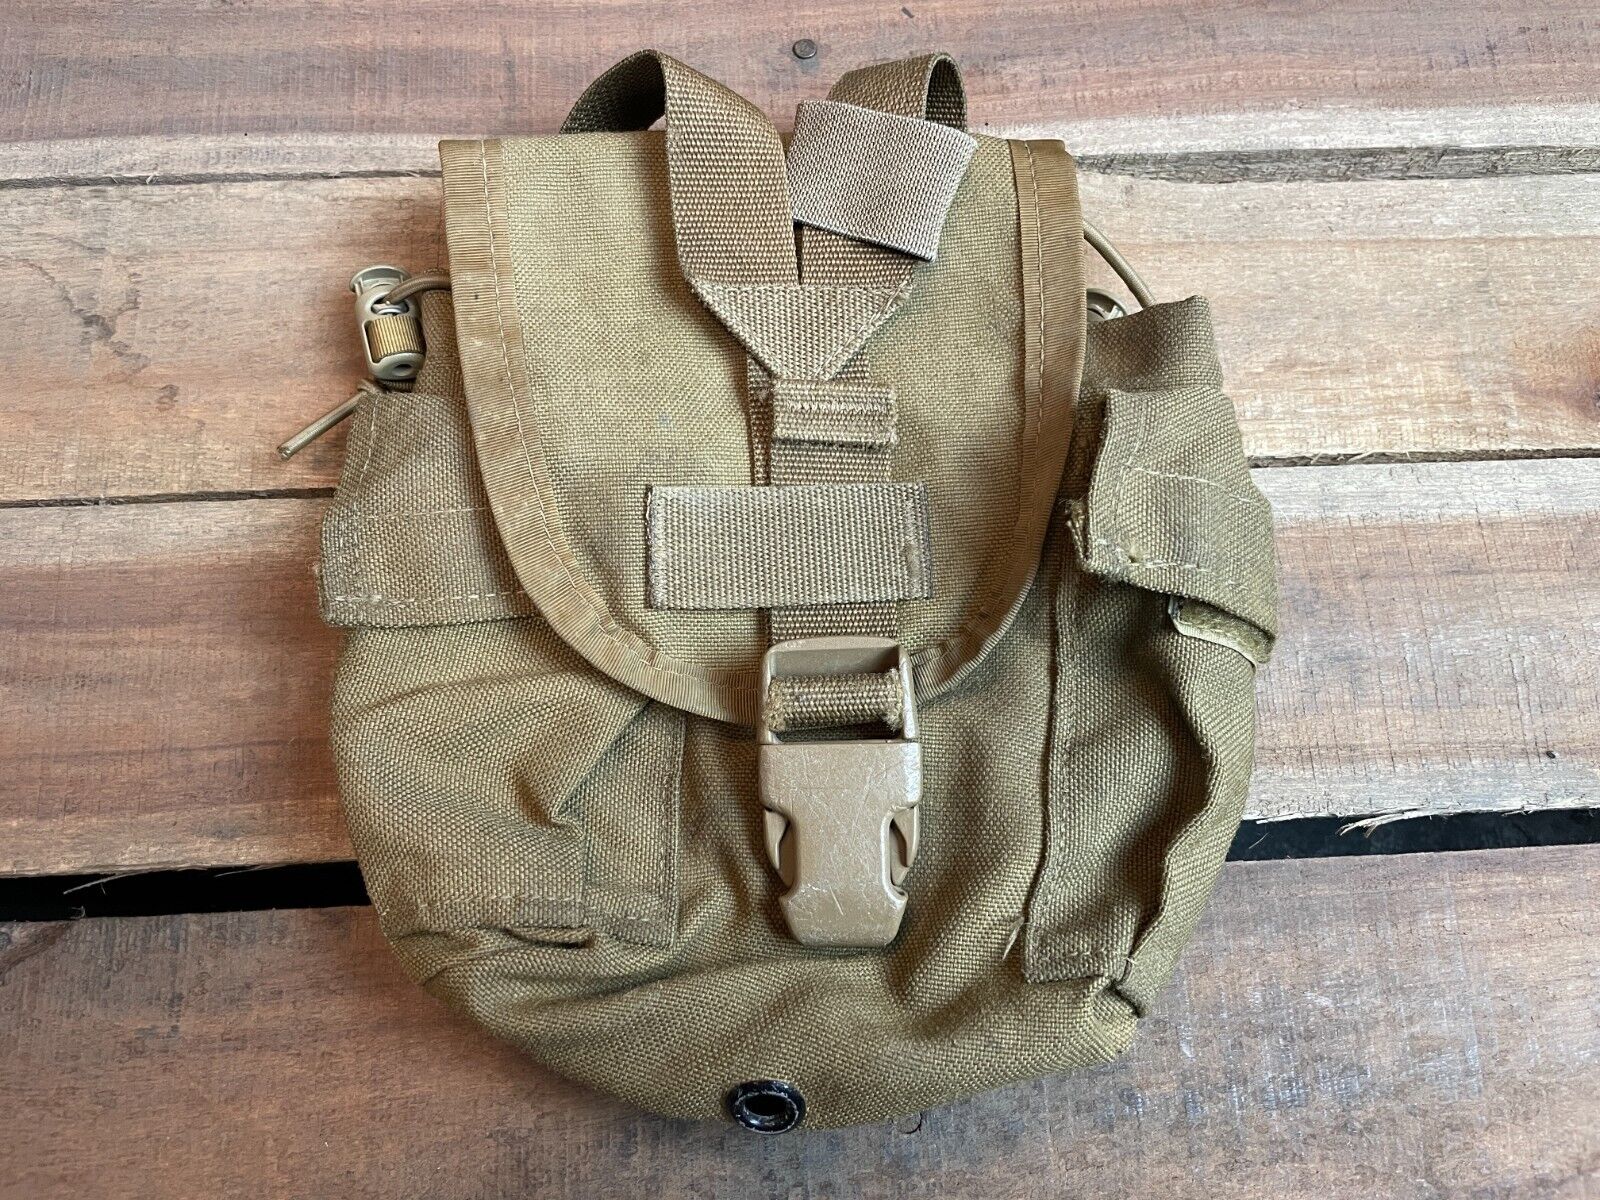 US Military USMC 1QT MOLLE Coyote CANTEEN COVER Pouch 8465-01-532-2303 EXC